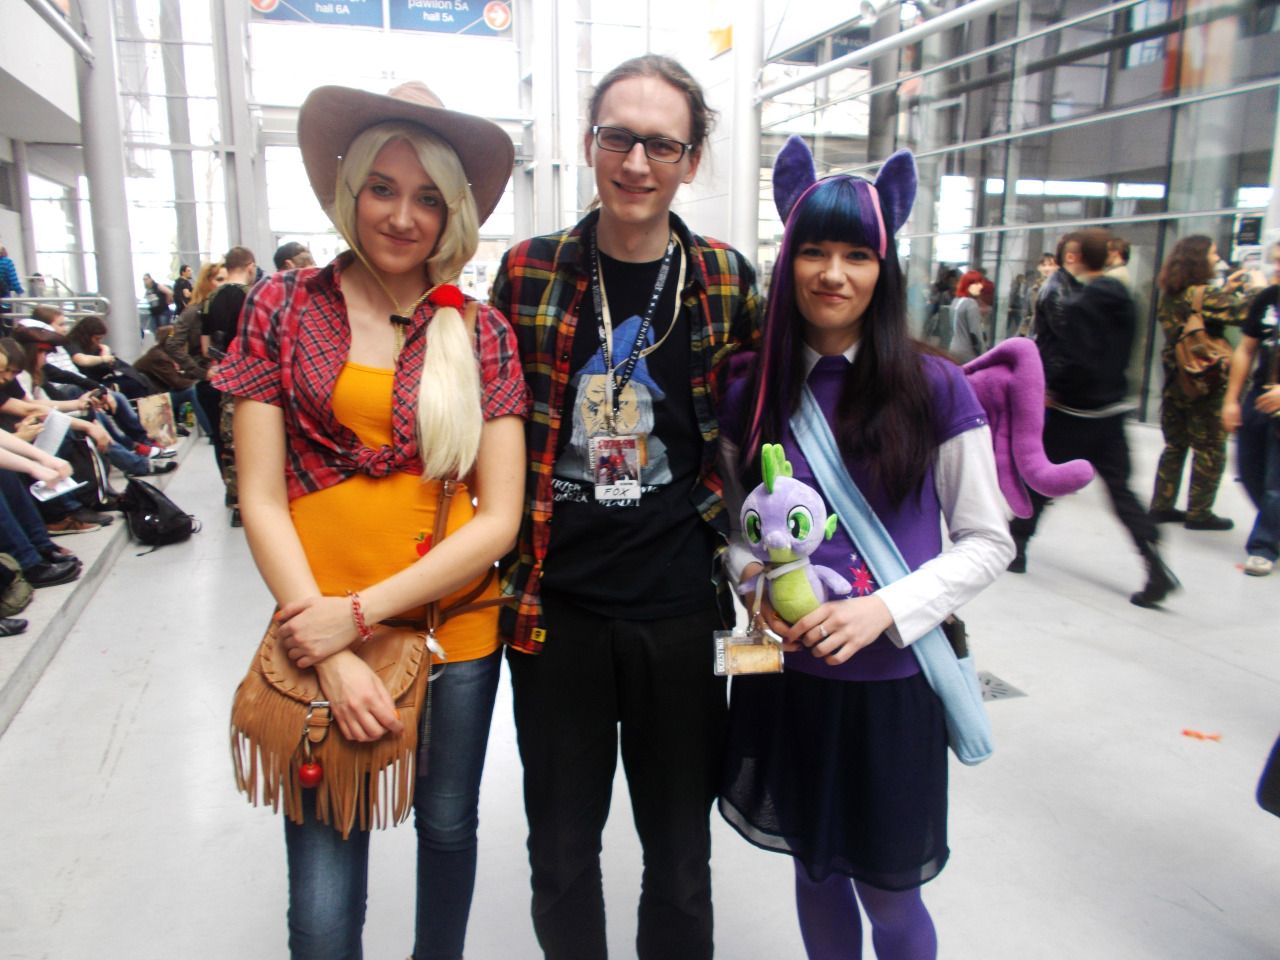 Pyrkon photos 2/2 I don&rsquo;t even ship Applejack and Twilight, but fine, I&rsquo;ll